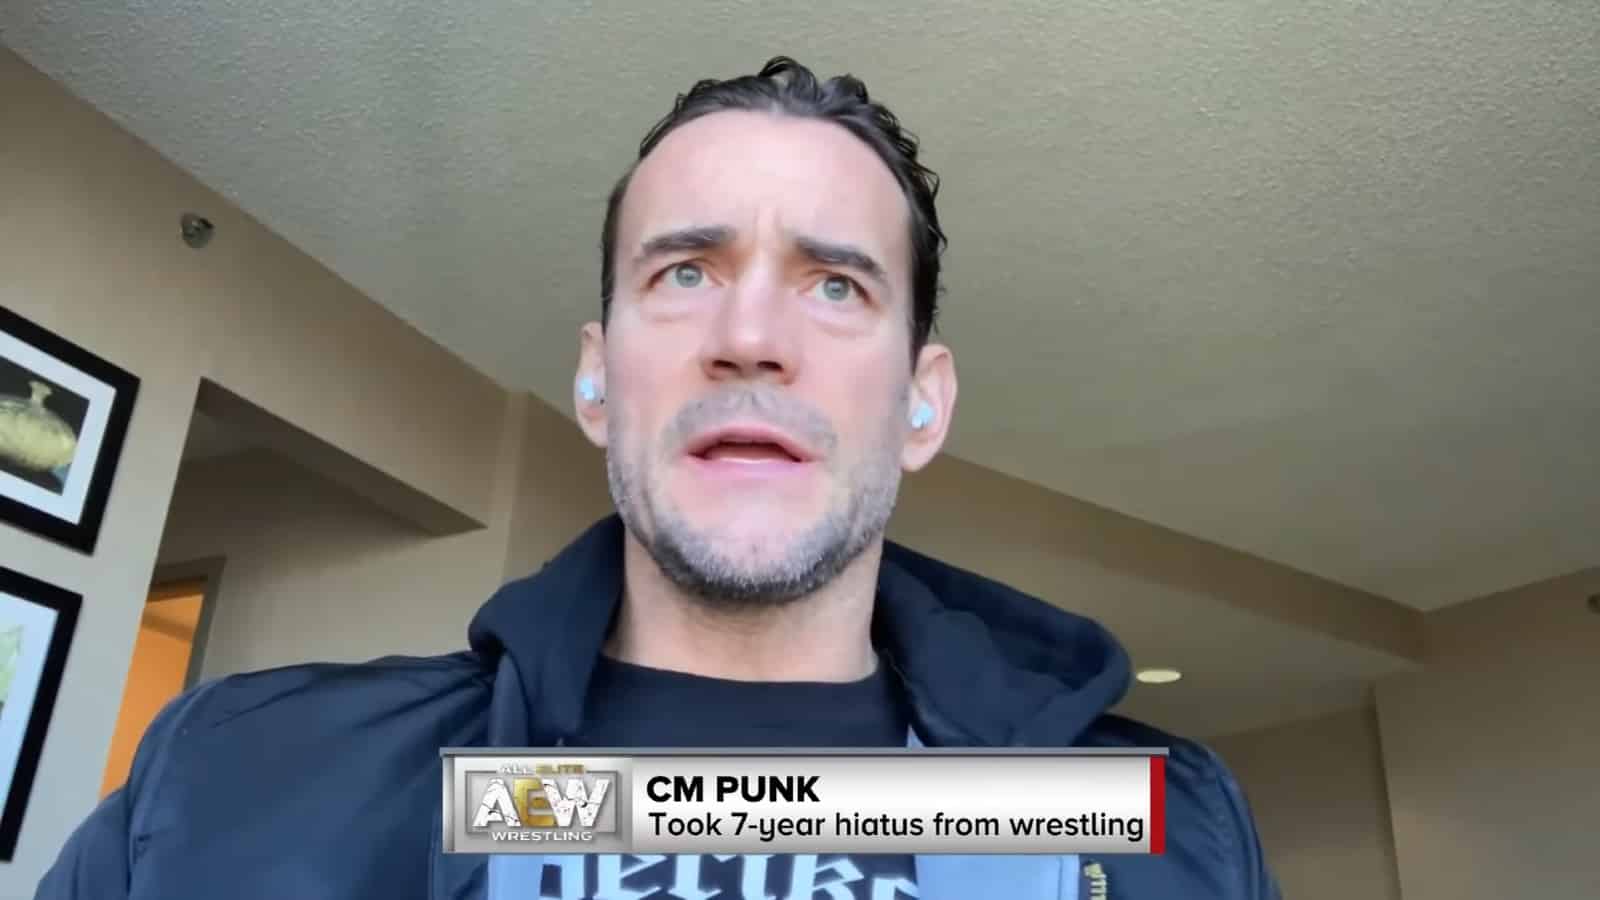 CM Punk appearing on Sportsnation on ESPN